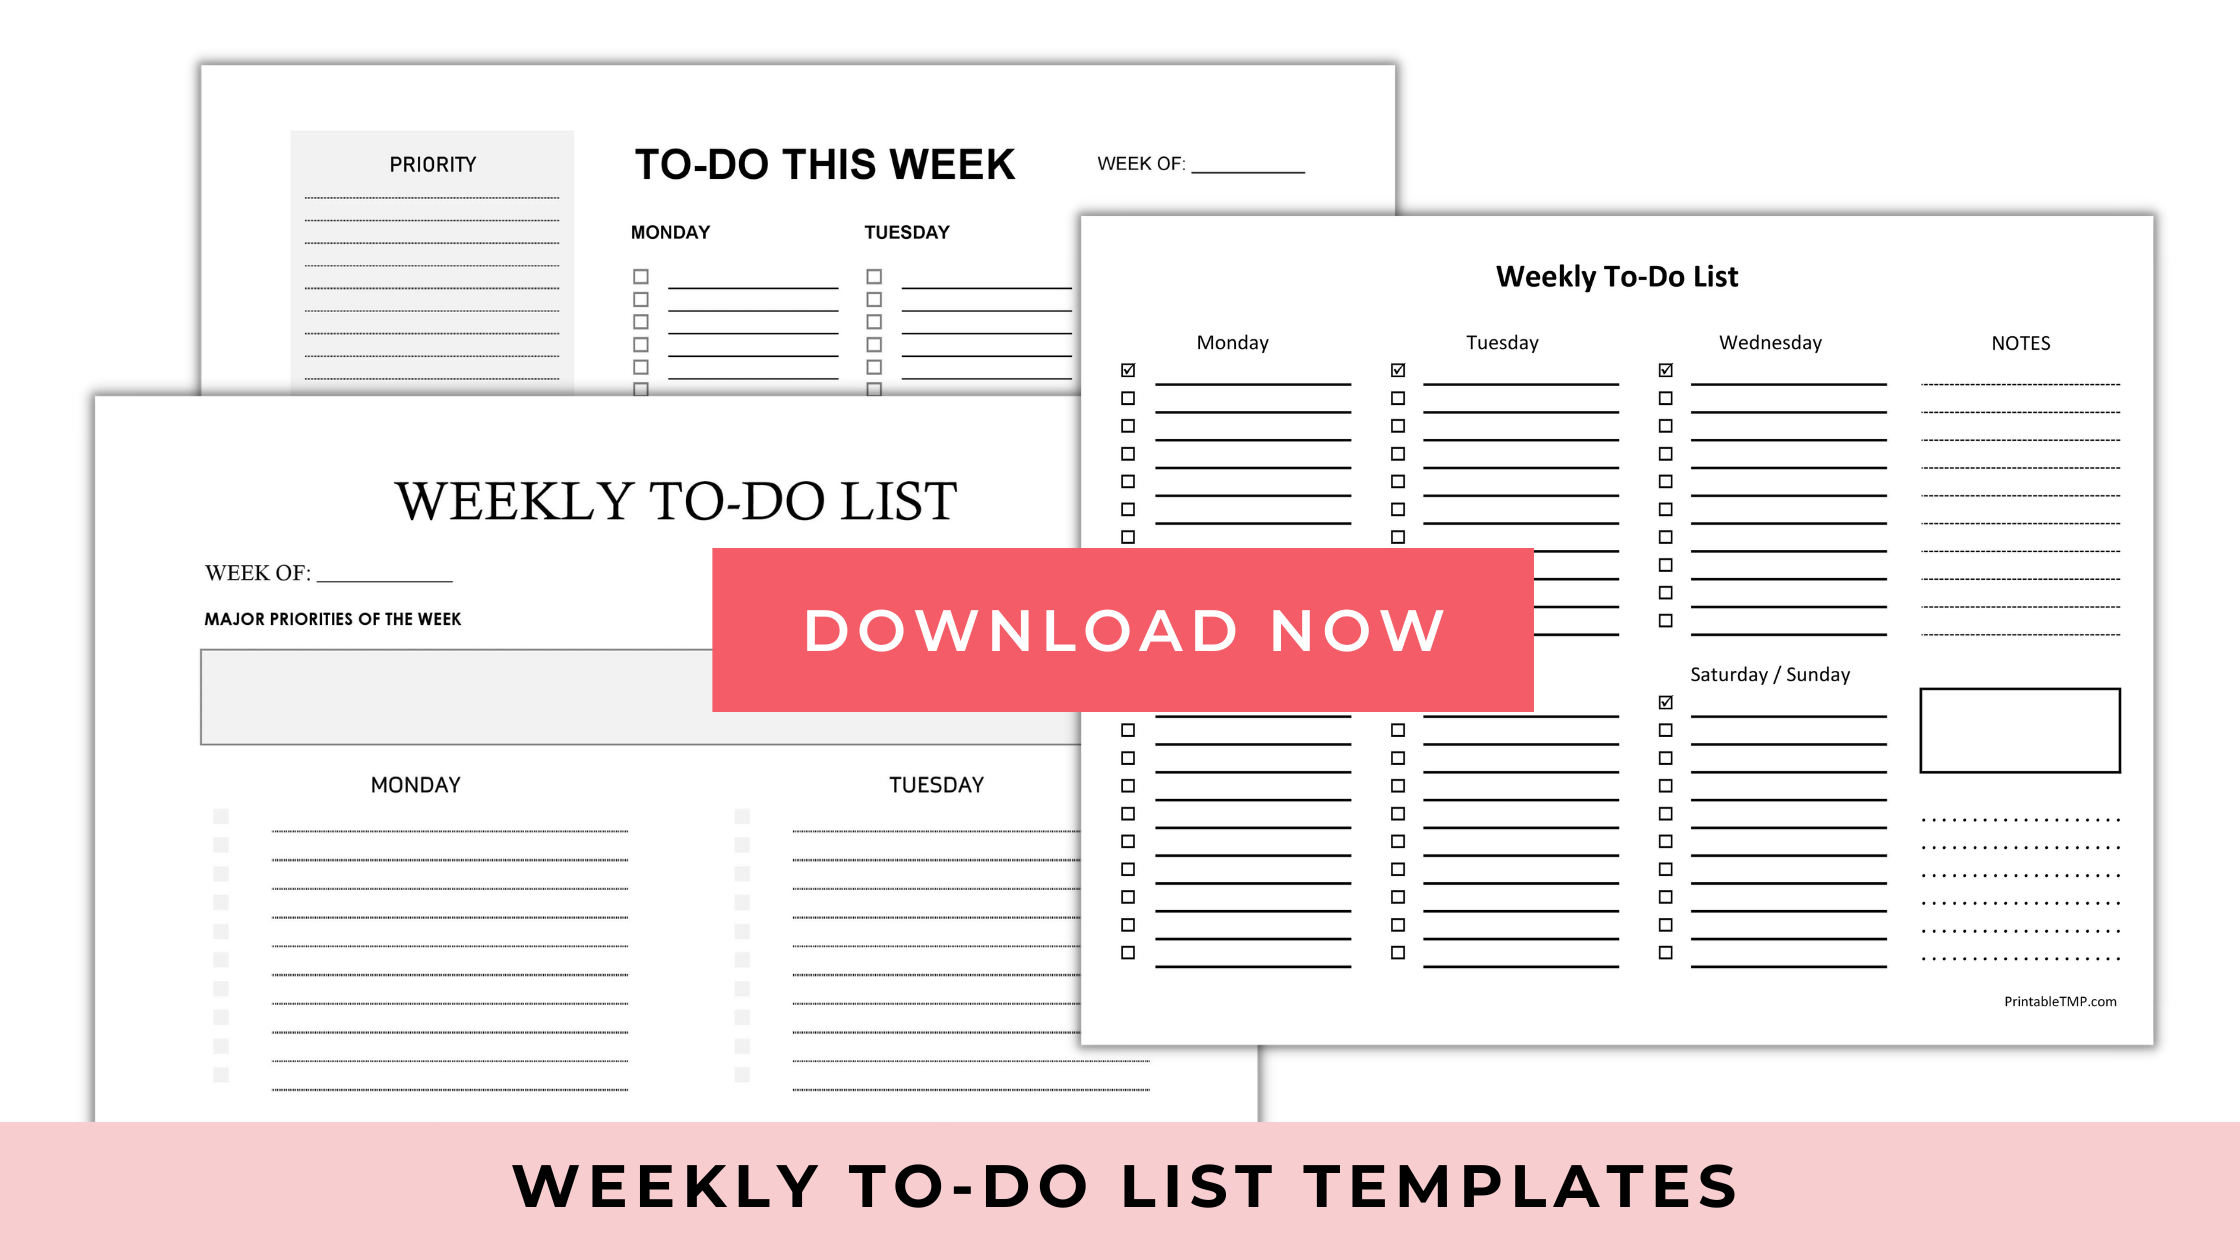 FREE Printable Weekly To-Do List and Checklist Templates